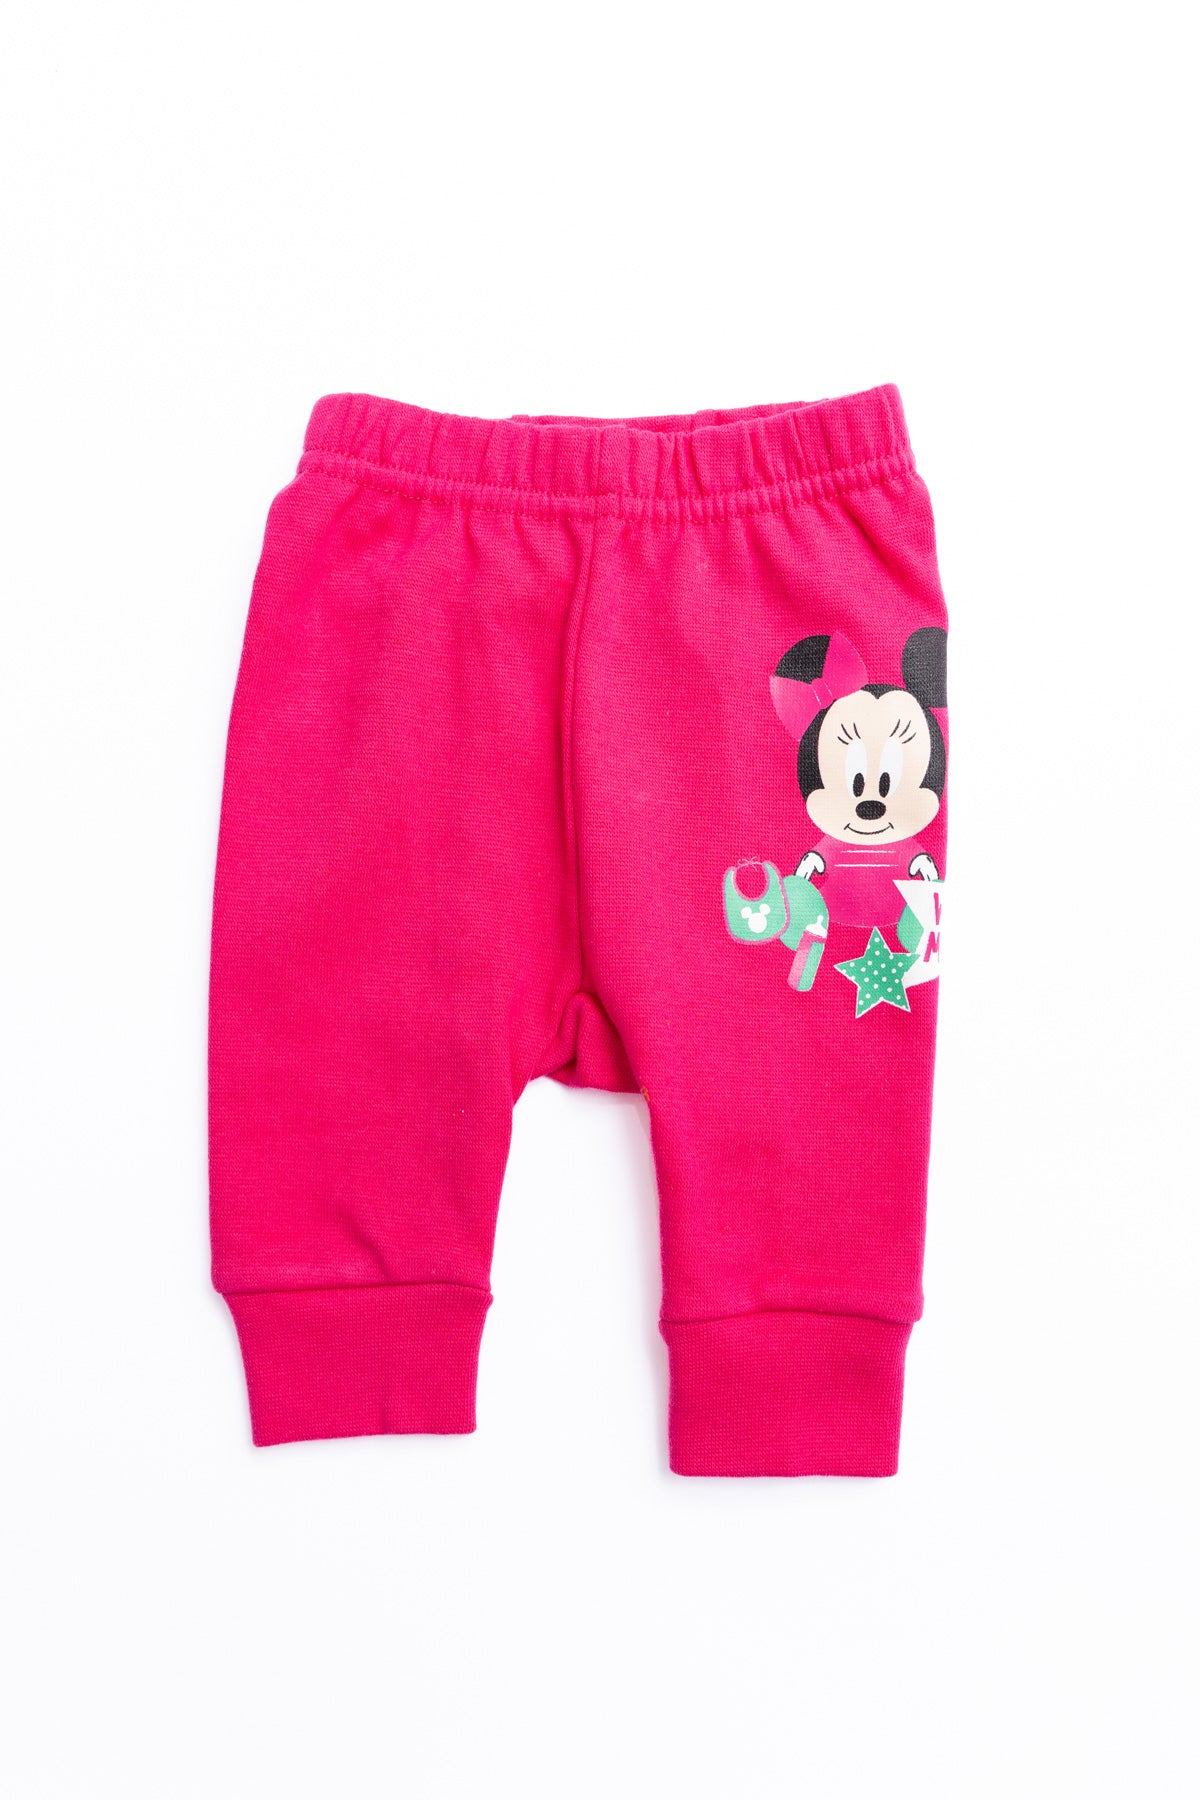 Pants Baby Minnie " What Mess " 4121